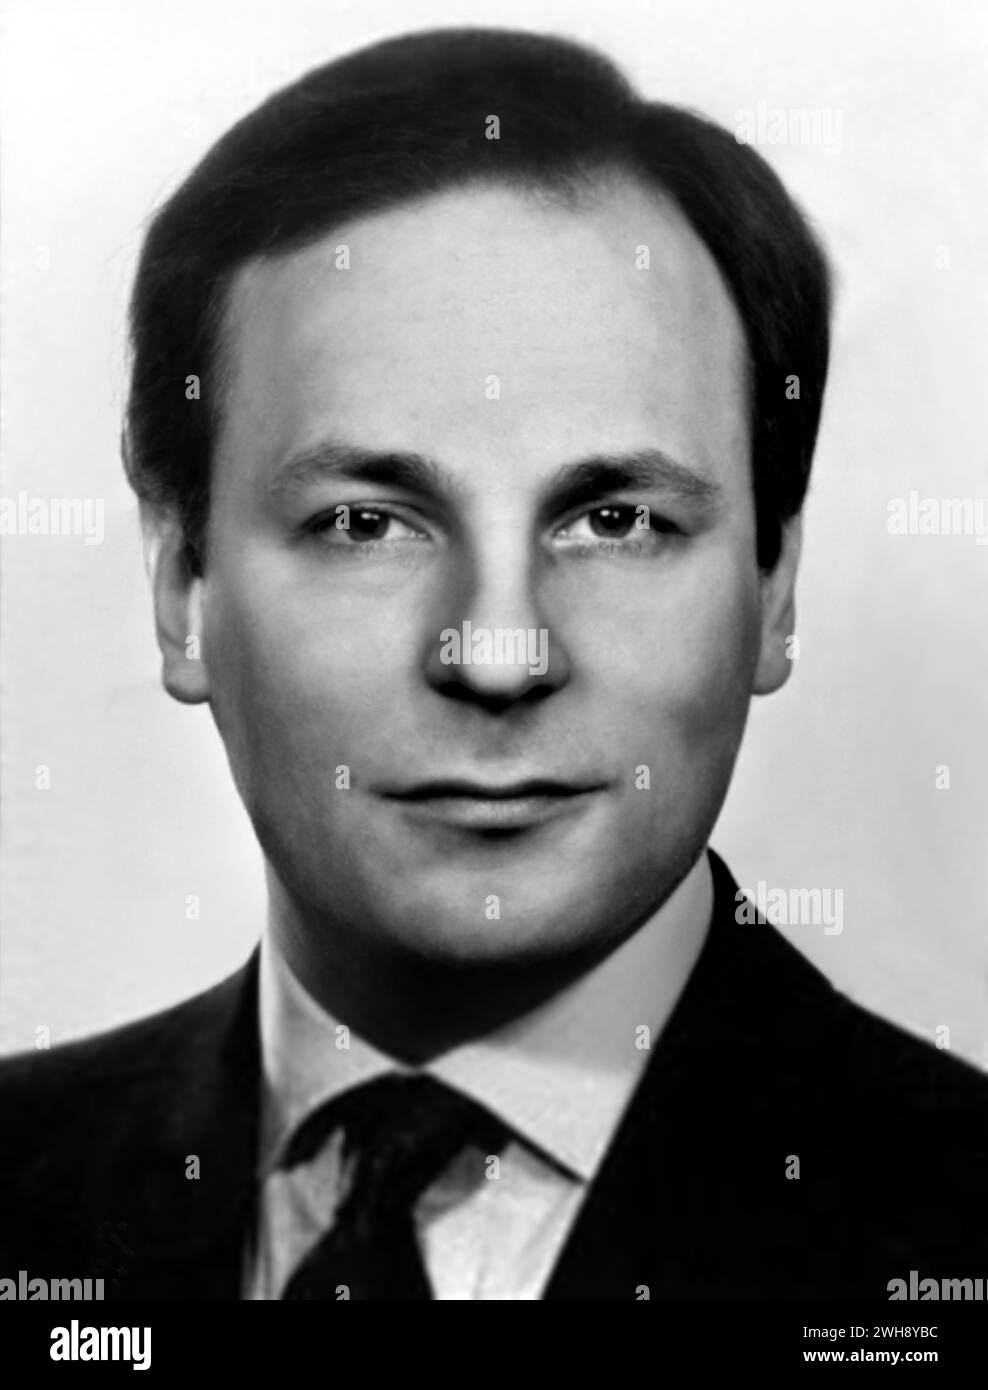 1989 ca., Rome , ITALY : The italian criminal outlaw RENATINO Enrico DE PEDIS ( Renato , 1954 - 1990 ), the Mafia boss of BANDA DELLA MAGLIANA , an Italian criminal organization based in the city of Rome , particularly active throughout the late 1970s until the early 1990s. De Pedis has also been linked to the disappearance of young girl EMANUELA ORLANDI ( kidnapped and disappeared forever on June 22, 1983 ), whose case has been linked with the Pope John Paul II assassination attempt . On 2 February 1990, De Pedis was ambushed and murdered by his former colleagues on Via del Pellegrino near Ca Stock Photo